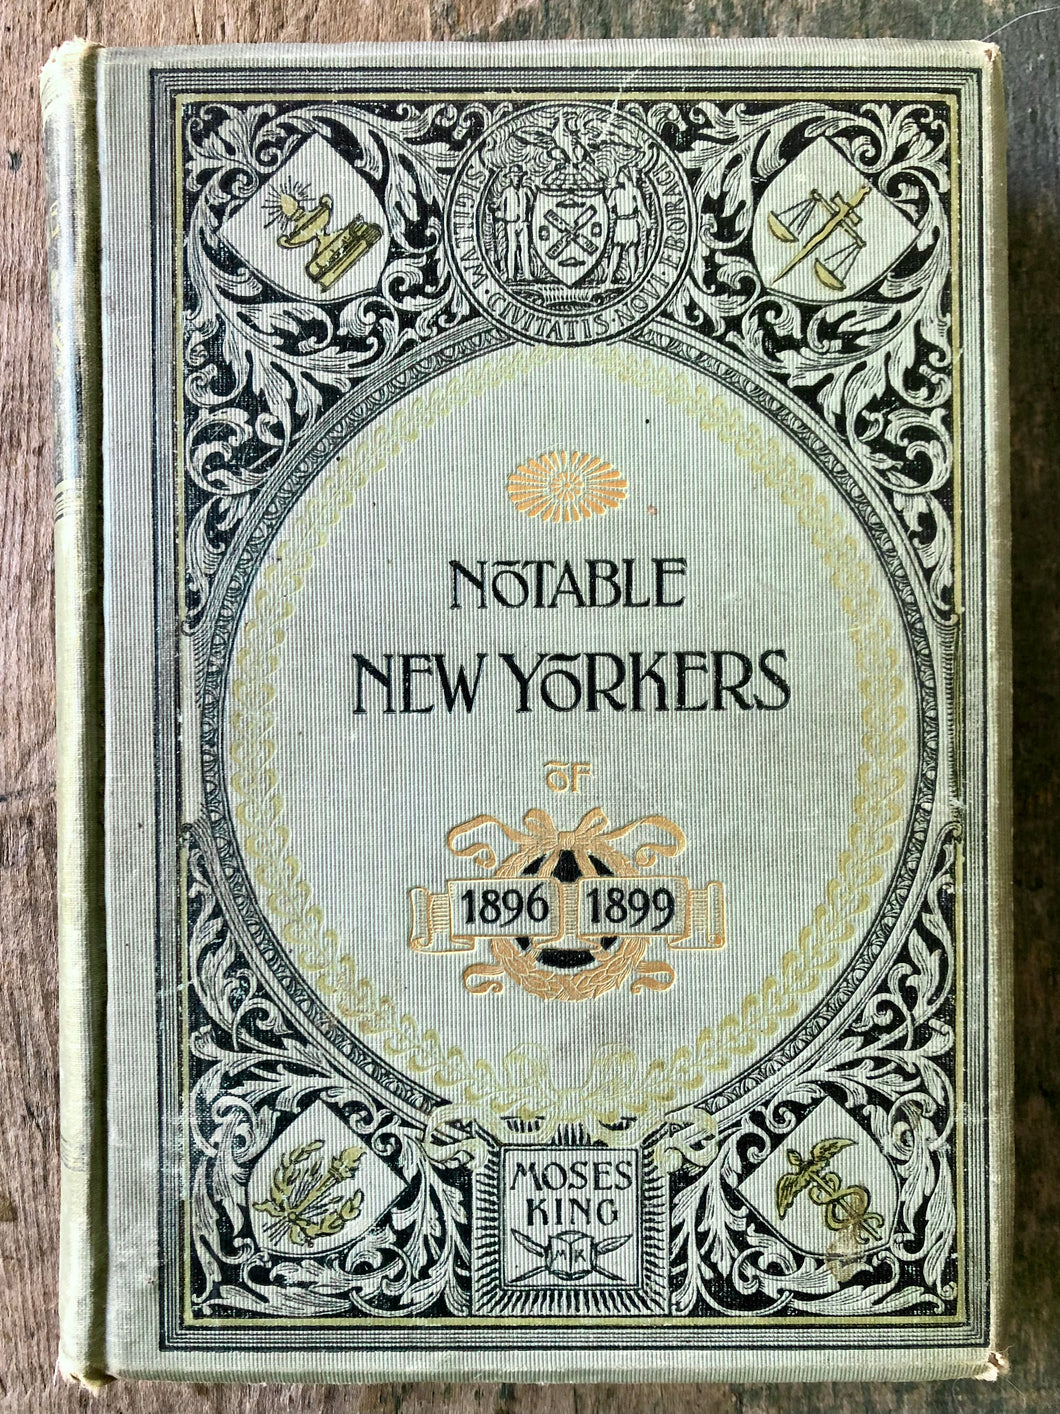 Notable New Yorkers of 1896-1899. A Companion Volume to King’s Handbook of New York City. by Moses King. INSCRIBED.